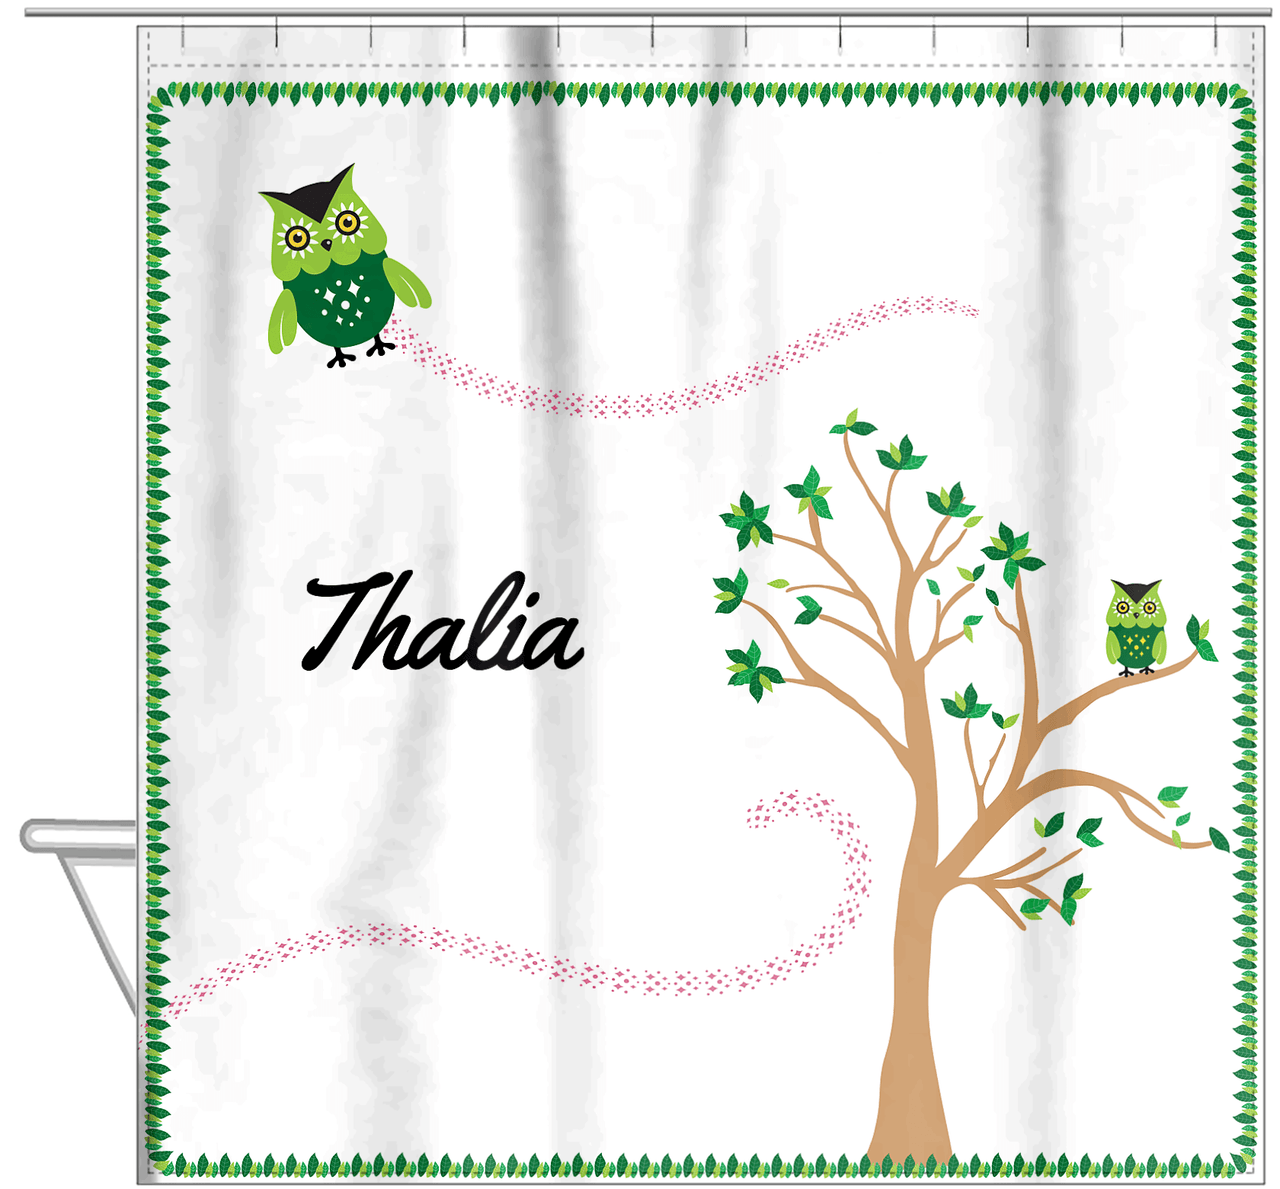 Personalized Owl Shower Curtain VII - Owl 08 - White Background - Hanging View